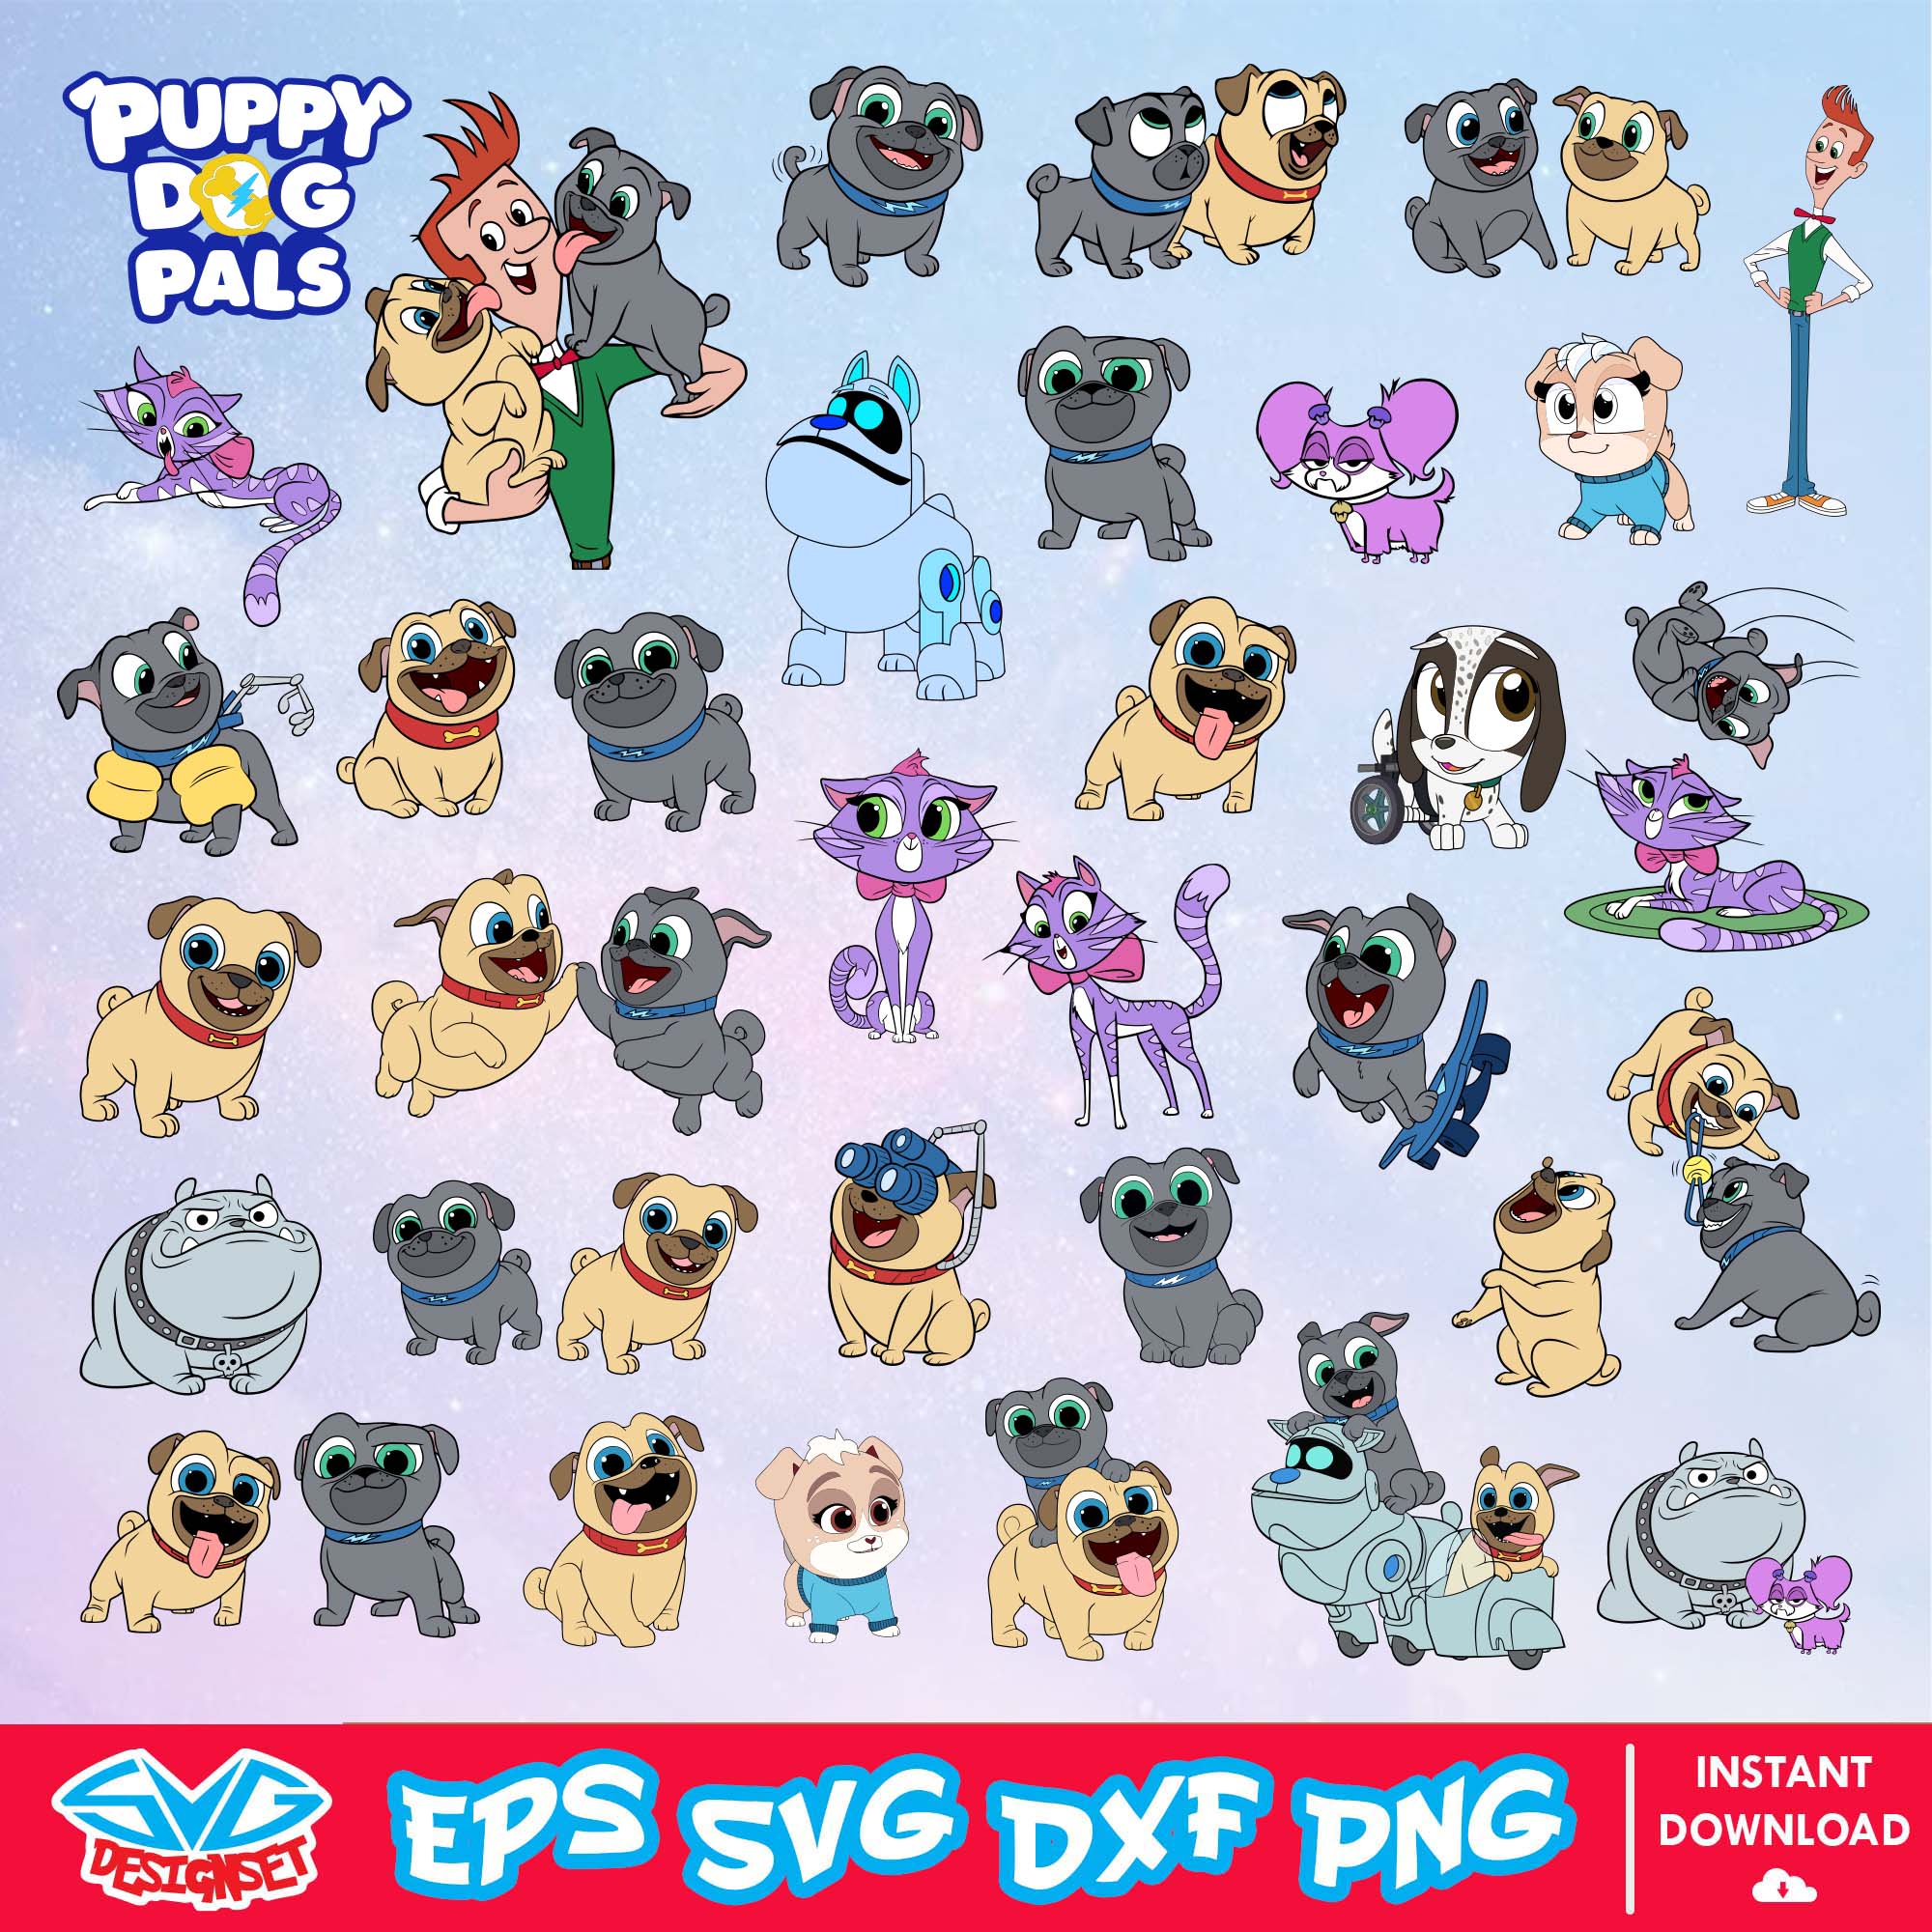 Puppy Dog Pals Svg, Dxf, Eps, Png, Clipart, Silhouette, and Cut files for Cricut & Silhouette Cameo #1 - SVGDesignSet